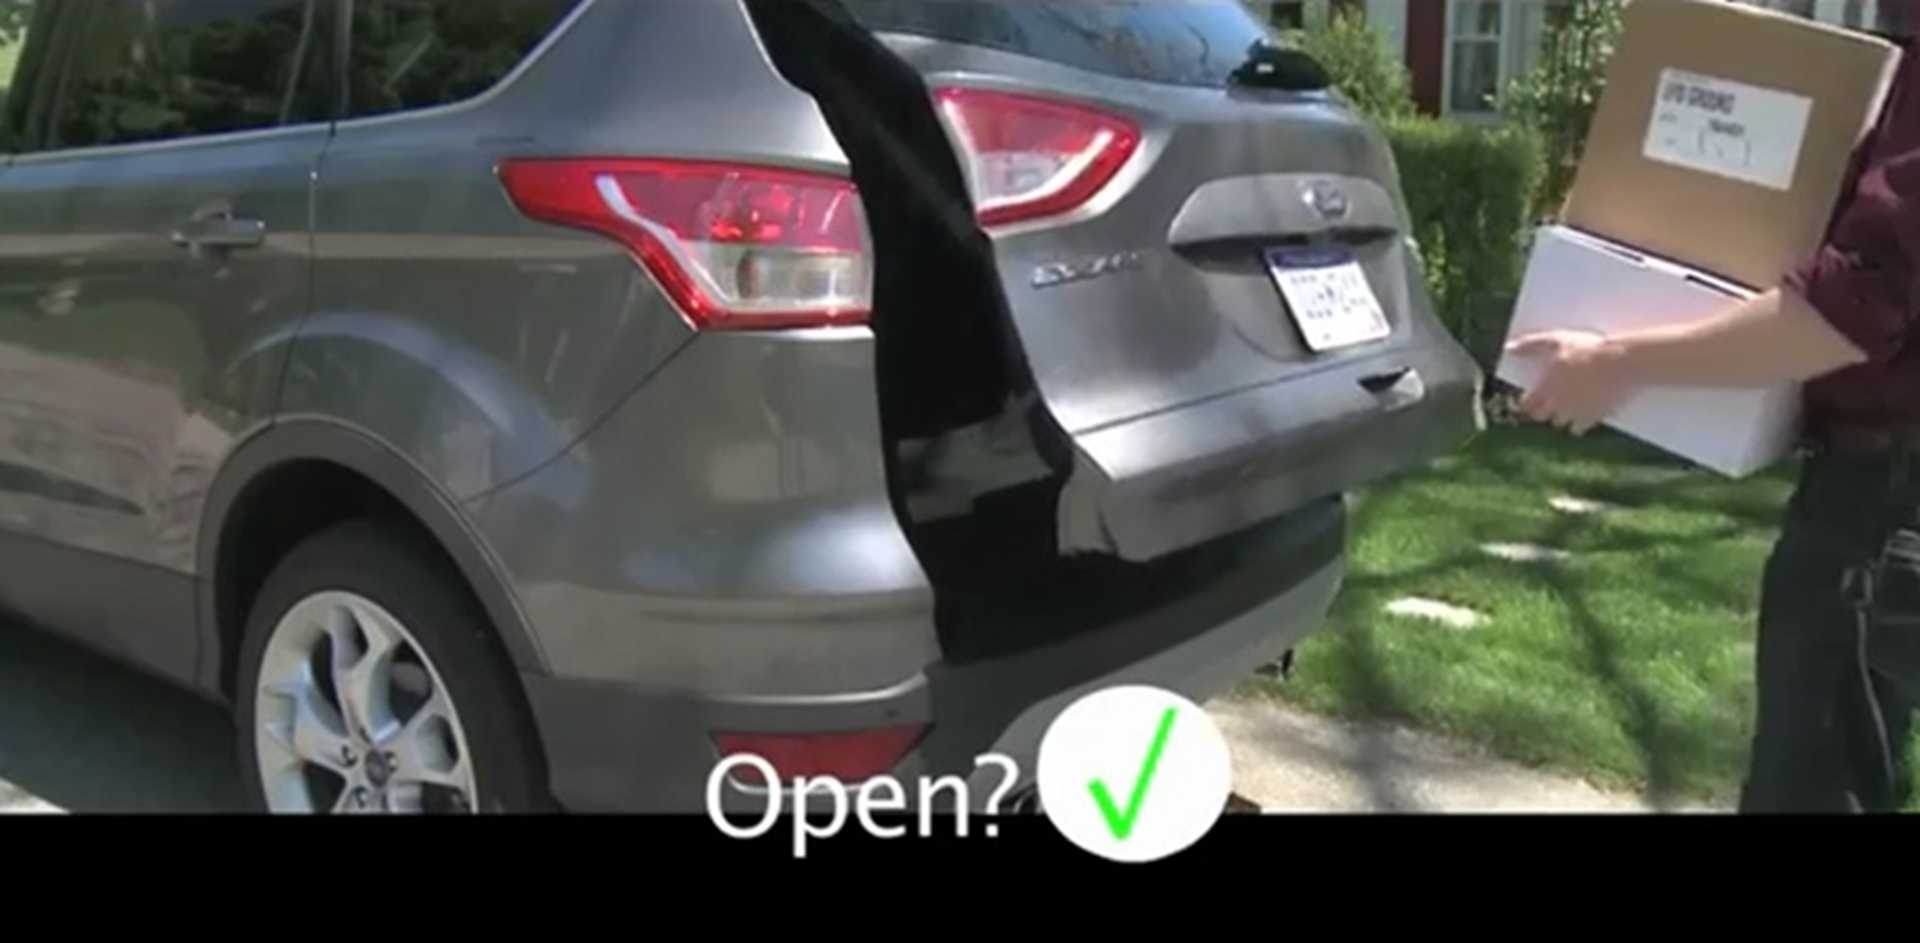 Ford Hands-Free Liftgate Tested in Downpours, Carwashes and Against Rolling Balls, Dogs and Shopping Carts